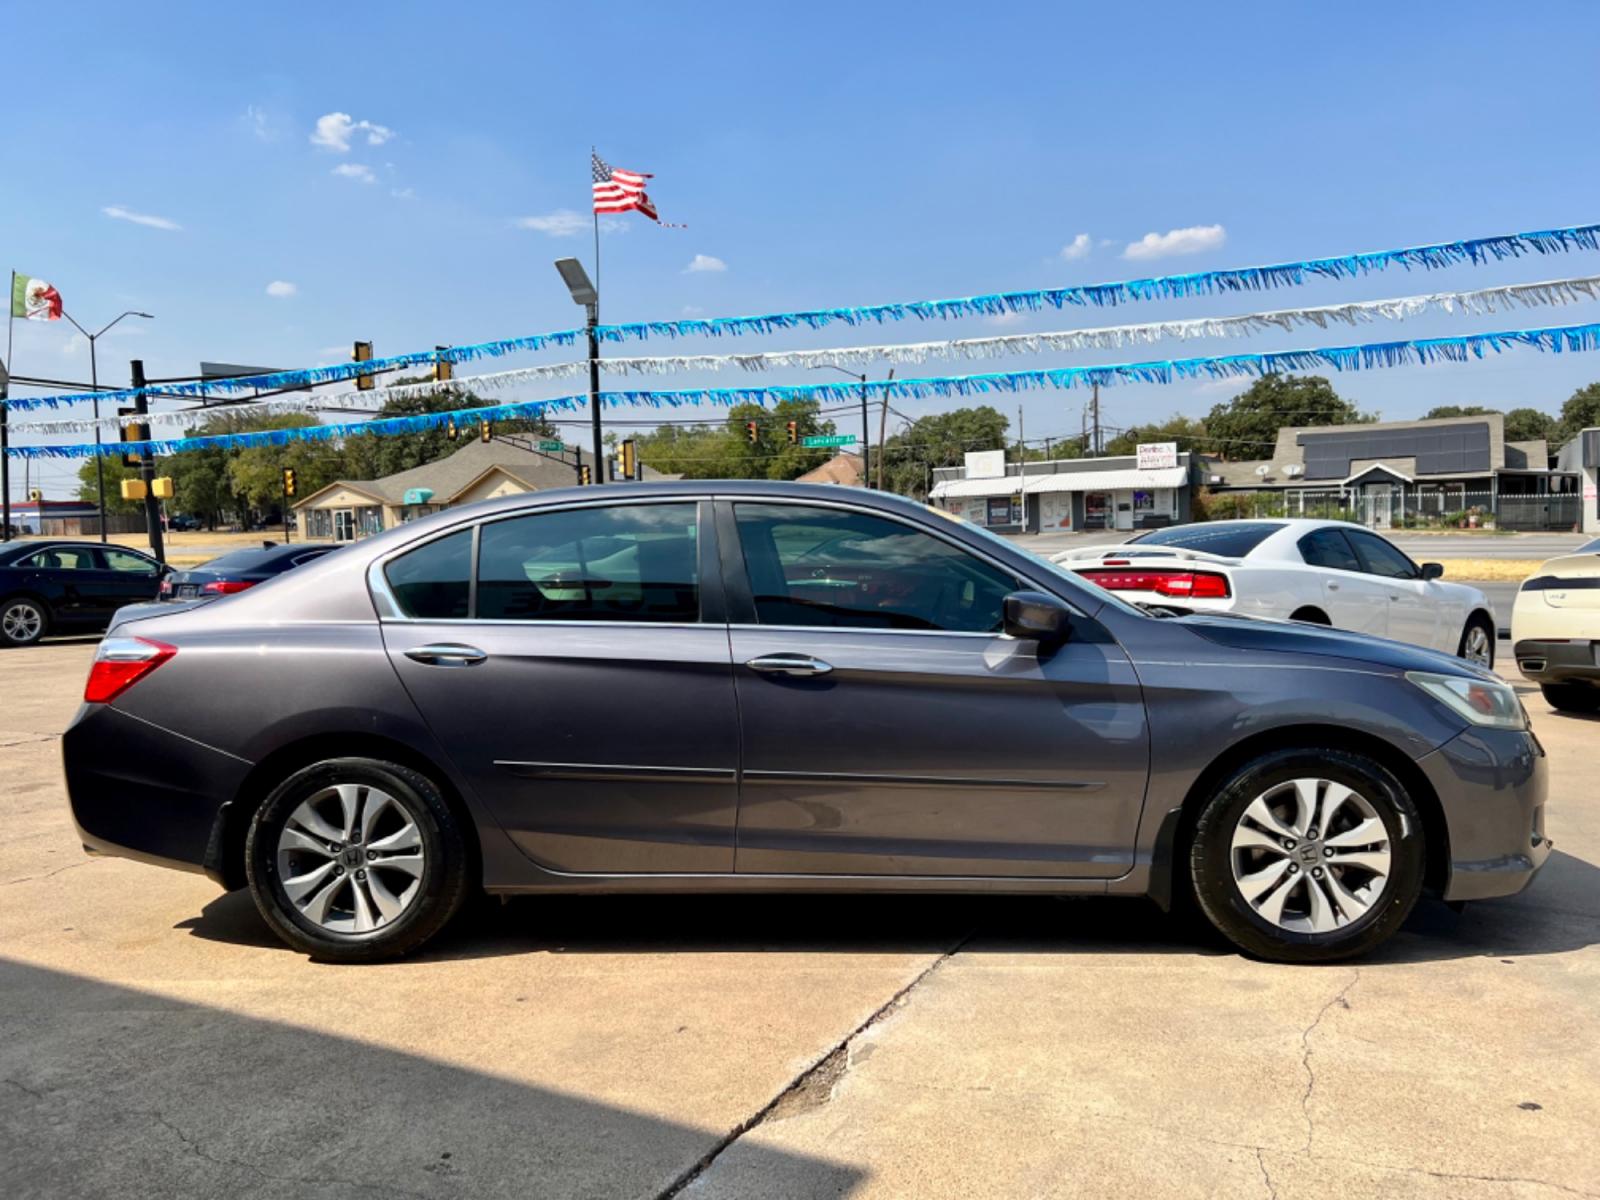 2015 SILVER HONDA ACCORD (1HGCR2F36FA) , located at 5900 E. Lancaster Ave., Fort Worth, TX, 76112, (817) 457-5456, 0.000000, 0.000000 - This is a 2015 HONDA ACCORD 4 DOOR SEDAN that is in excellent condition. There are no dents or scratches. The interior is clean with no rips or tears or stains. All power windows, door locks and seats. Ice cold AC for those hot Texas summer days. It is equipped with a CD player, AM/FM radio, AUX por - Photo #7